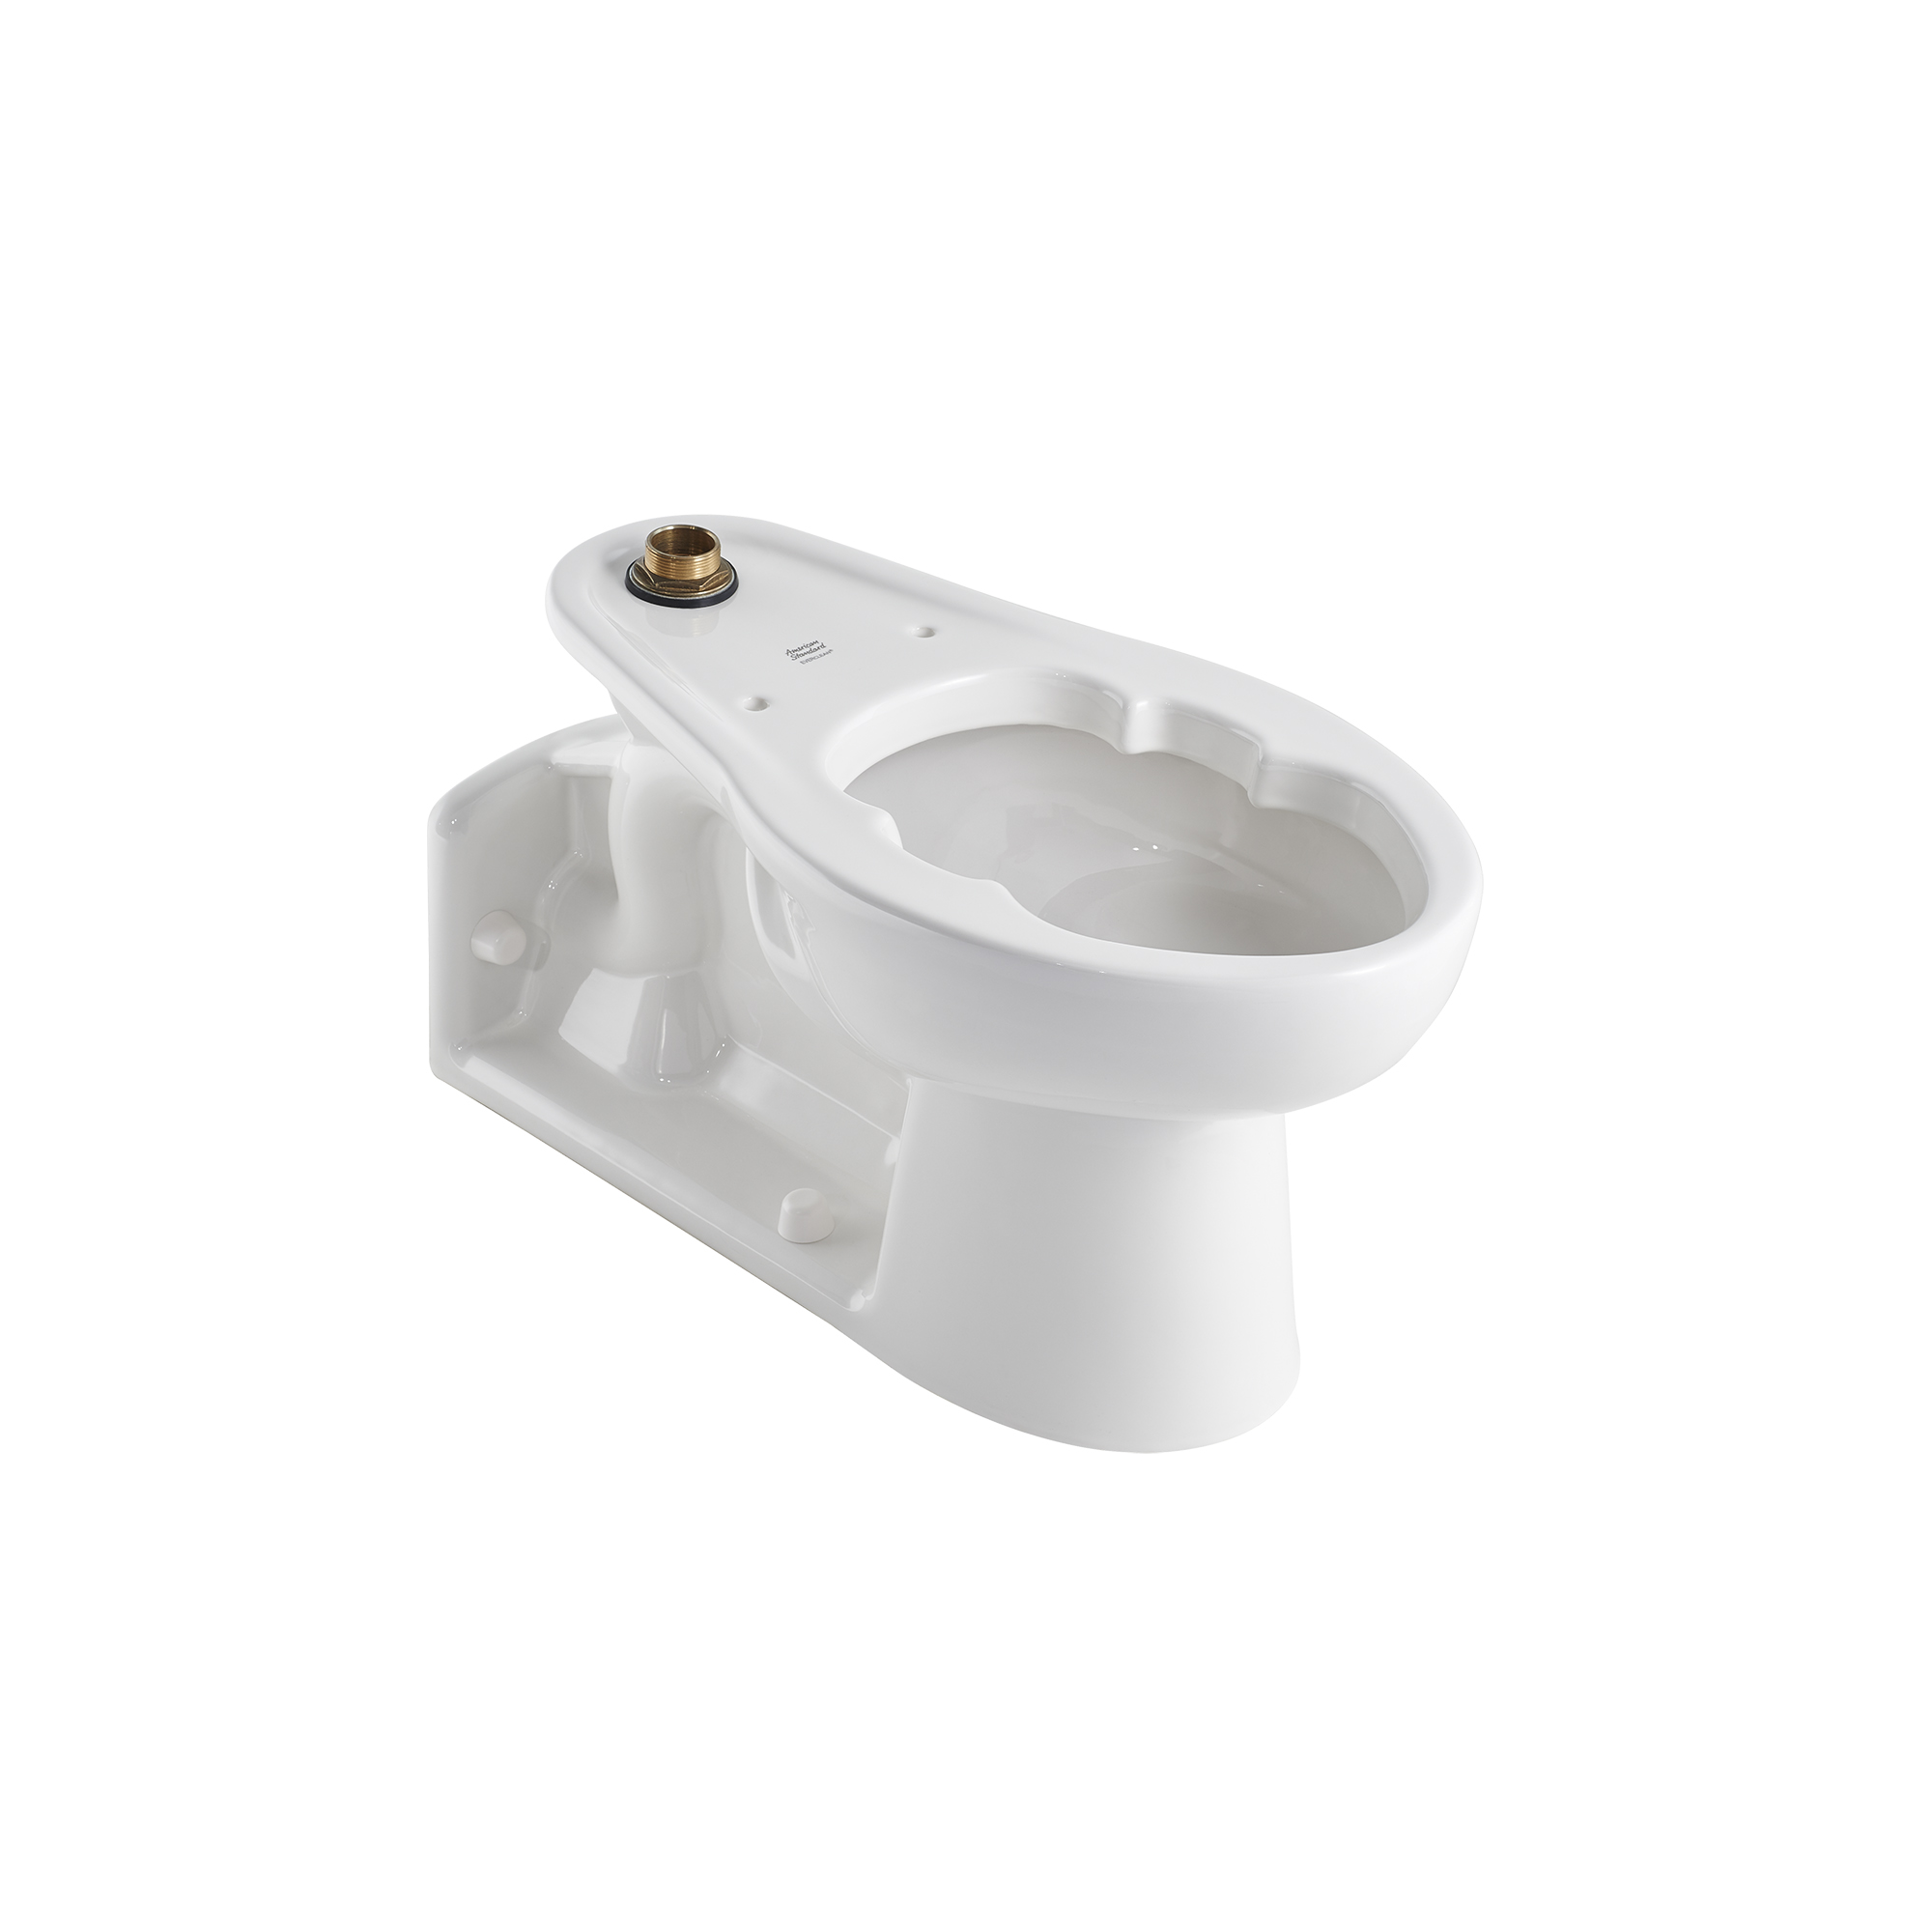 Priolo™ 1.1 – 1.6 gpf (4.2 – 6.0 Lpf) Top Spud Back Outlet Elongated EverClean™ Bowl With Bedpan Lugs